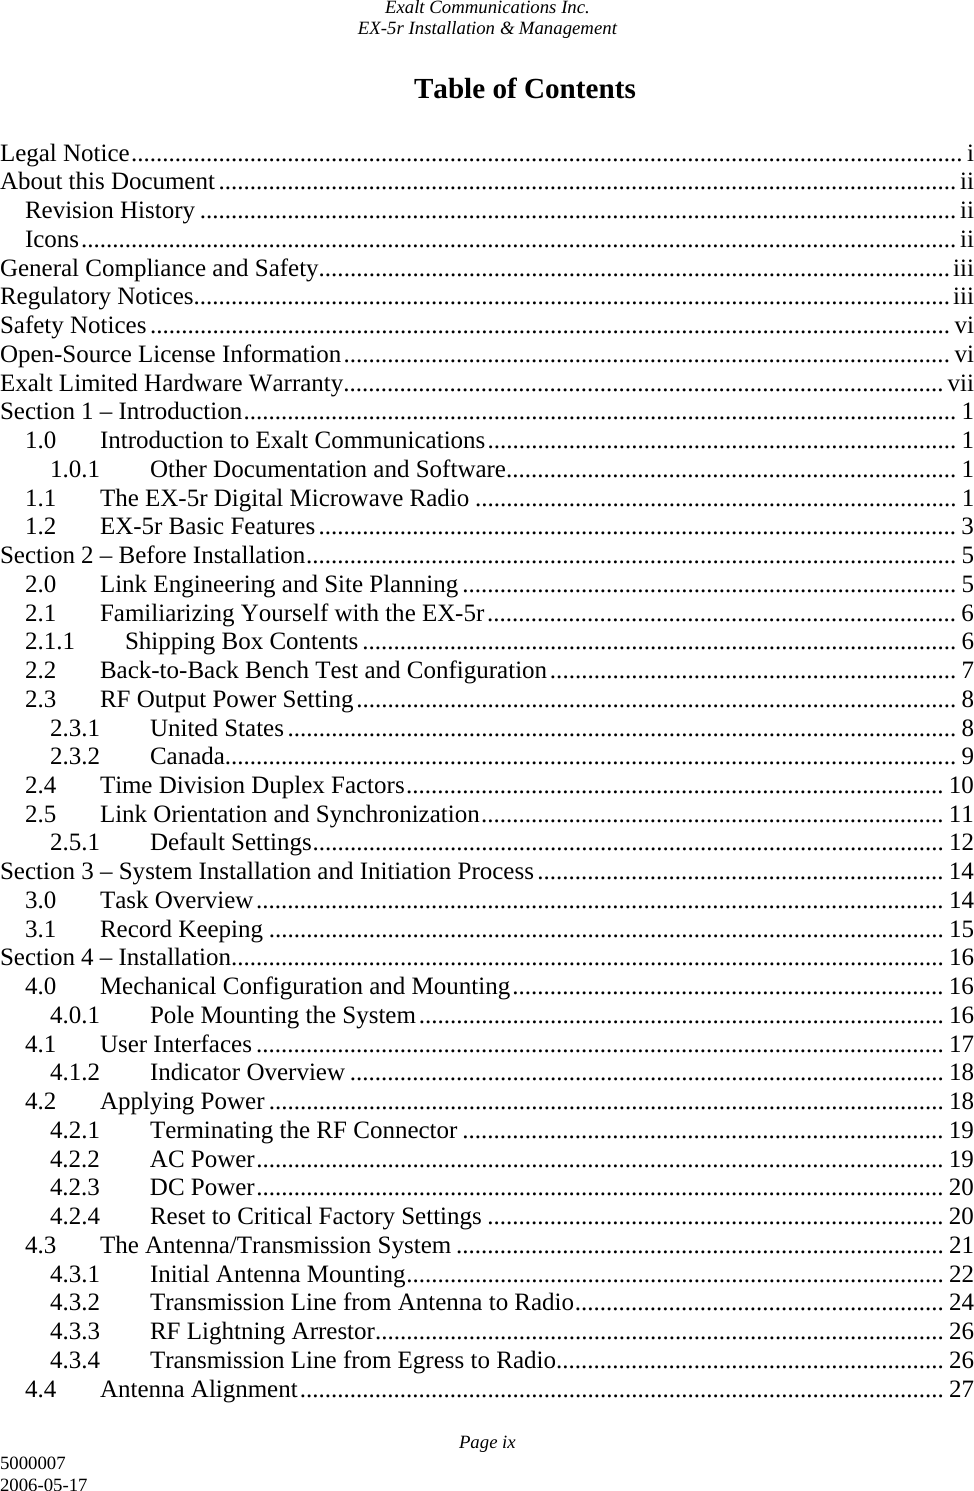 Exalt Communications Inc. EX-5r Installation &amp; Management Page ix 5000007 2006-05-17 Table of Contents  Legal Notice..................................................................................................................................... i About this Document......................................................................................................................ii Revision History ......................................................................................................................... ii Icons............................................................................................................................................ii General Compliance and Safety.....................................................................................................iii Regulatory Notices.........................................................................................................................iii Safety Notices................................................................................................................................ vi Open-Source License Information.................................................................................................vi Exalt Limited Hardware Warranty................................................................................................vii Section 1 – Introduction.................................................................................................................. 1 1.0  Introduction to Exalt Communications........................................................................... 1 1.0.1  Other Documentation and Software........................................................................ 1 1.1  The EX-5r Digital Microwave Radio ............................................................................. 1 1.2  EX-5r Basic Features...................................................................................................... 3 Section 2 – Before Installation........................................................................................................ 5 2.0  Link Engineering and Site Planning ............................................................................... 5 2.1  Familiarizing Yourself with the EX-5r........................................................................... 6 2.1.1  Shipping Box Contents............................................................................................... 6 2.2  Back-to-Back Bench Test and Configuration................................................................. 7 2.3  RF Output Power Setting................................................................................................ 8 2.3.1 United States........................................................................................................... 8 2.3.2 Canada..................................................................................................................... 9 2.4  Time Division Duplex Factors...................................................................................... 10 2.5  Link Orientation and Synchronization.......................................................................... 11 2.5.1 Default Settings..................................................................................................... 12 Section 3 – System Installation and Initiation Process................................................................. 14 3.0 Task Overview.............................................................................................................. 14 3.1 Record Keeping ............................................................................................................ 15 Section 4 – Installation.................................................................................................................. 16 4.0  Mechanical Configuration and Mounting..................................................................... 16 4.0.1  Pole Mounting the System.................................................................................... 16 4.1 User Interfaces.............................................................................................................. 17 4.1.2 Indicator Overview ............................................................................................... 18 4.2 Applying Power............................................................................................................ 18 4.2.1  Terminating the RF Connector ............................................................................. 19 4.2.2 AC Power.............................................................................................................. 19 4.2.3 DC Power.............................................................................................................. 20 4.2.4  Reset to Critical Factory Settings ......................................................................... 20 4.3  The Antenna/Transmission System .............................................................................. 21 4.3.1  Initial Antenna Mounting...................................................................................... 22 4.3.2  Transmission Line from Antenna to Radio........................................................... 24 4.3.3  RF Lightning Arrestor........................................................................................... 26 4.3.4  Transmission Line from Egress to Radio.............................................................. 26 4.4 Antenna Alignment....................................................................................................... 27 